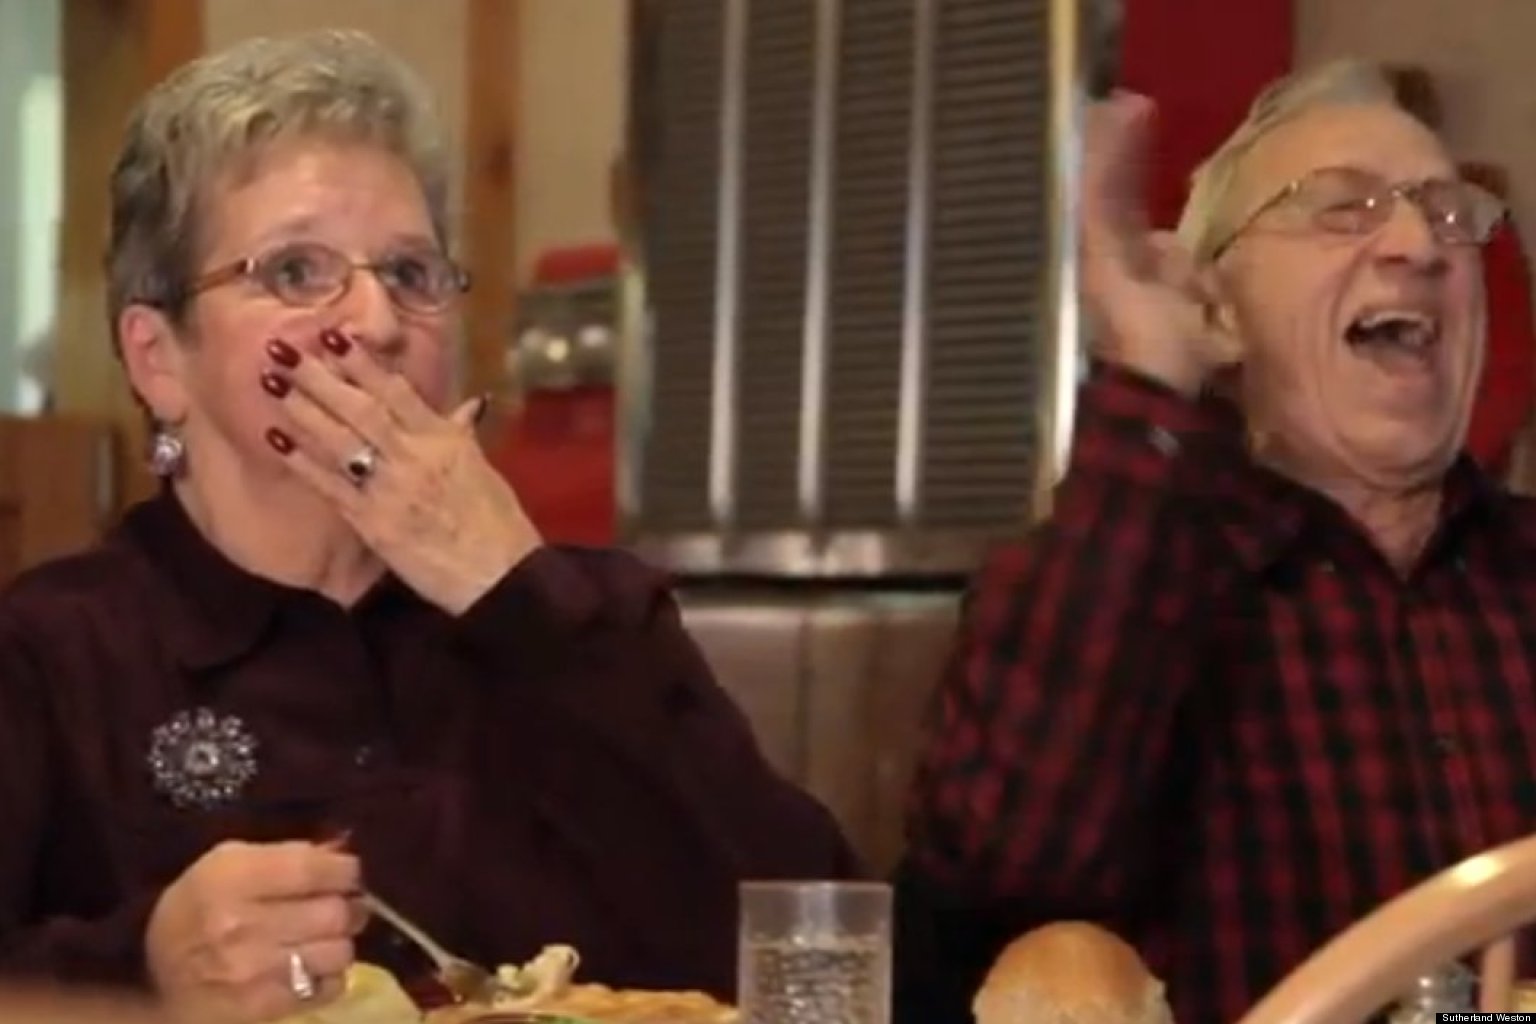 Baked In A Buttery Flaky Crust Dysarts Restaurant Ad Outtakes Are Hilarious And 3306